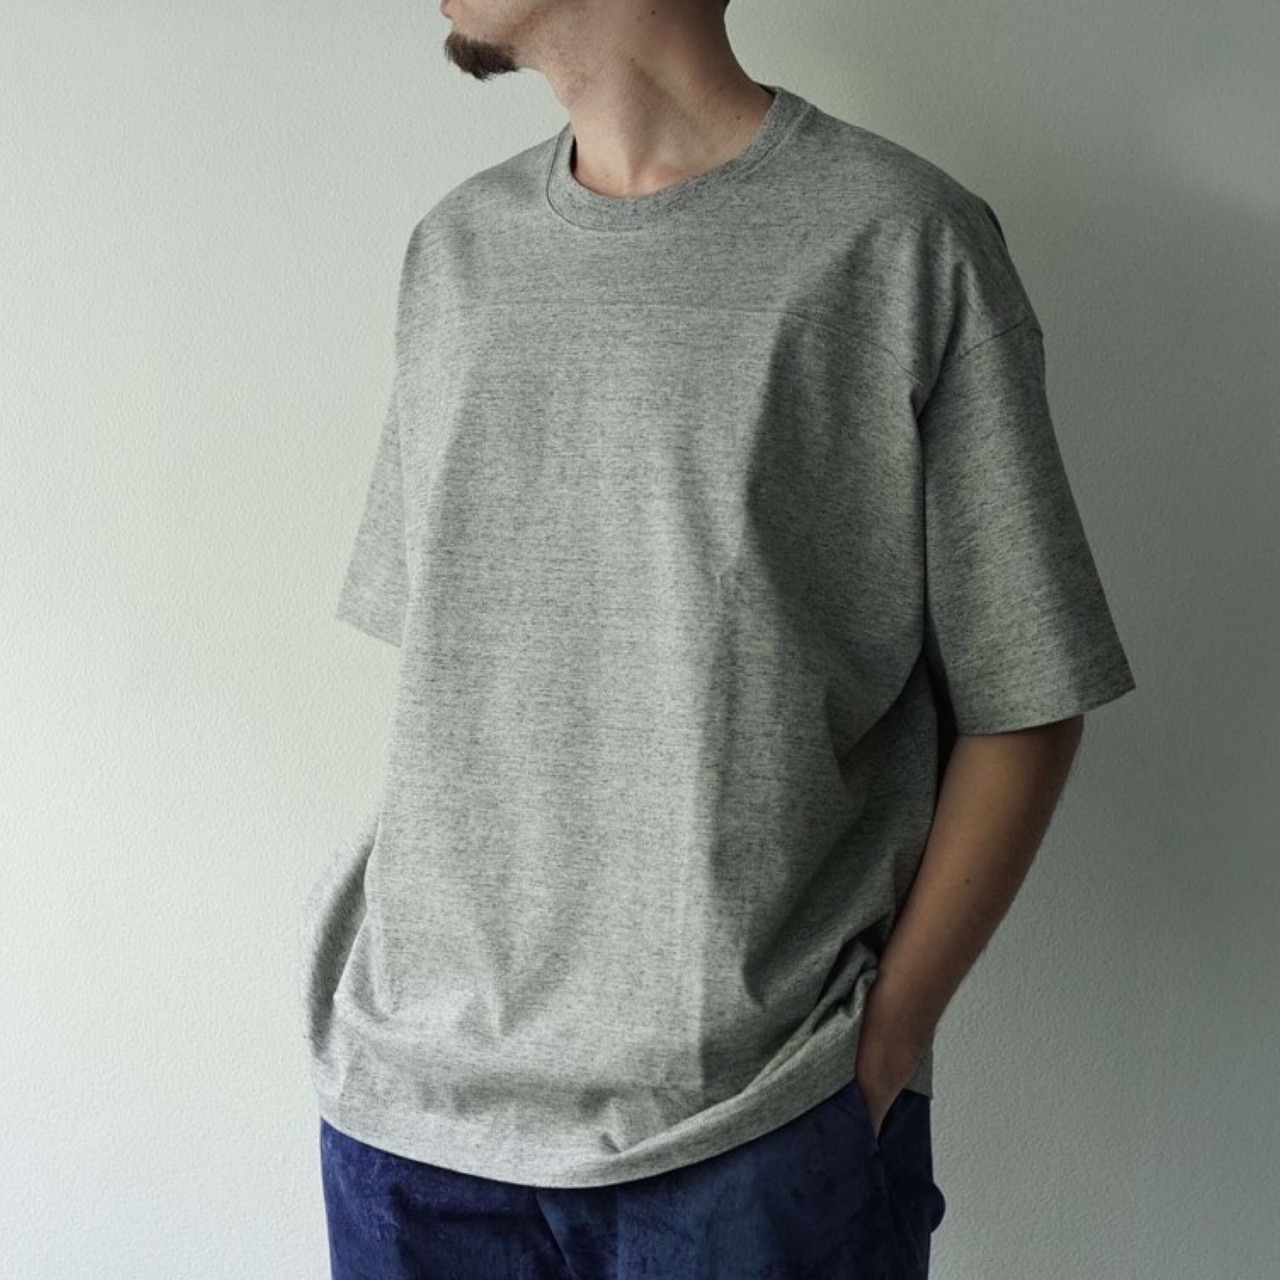 CAPERTICA　Suvin Cotton Compact Jersey Football H/S Tee (MIX GRAY)